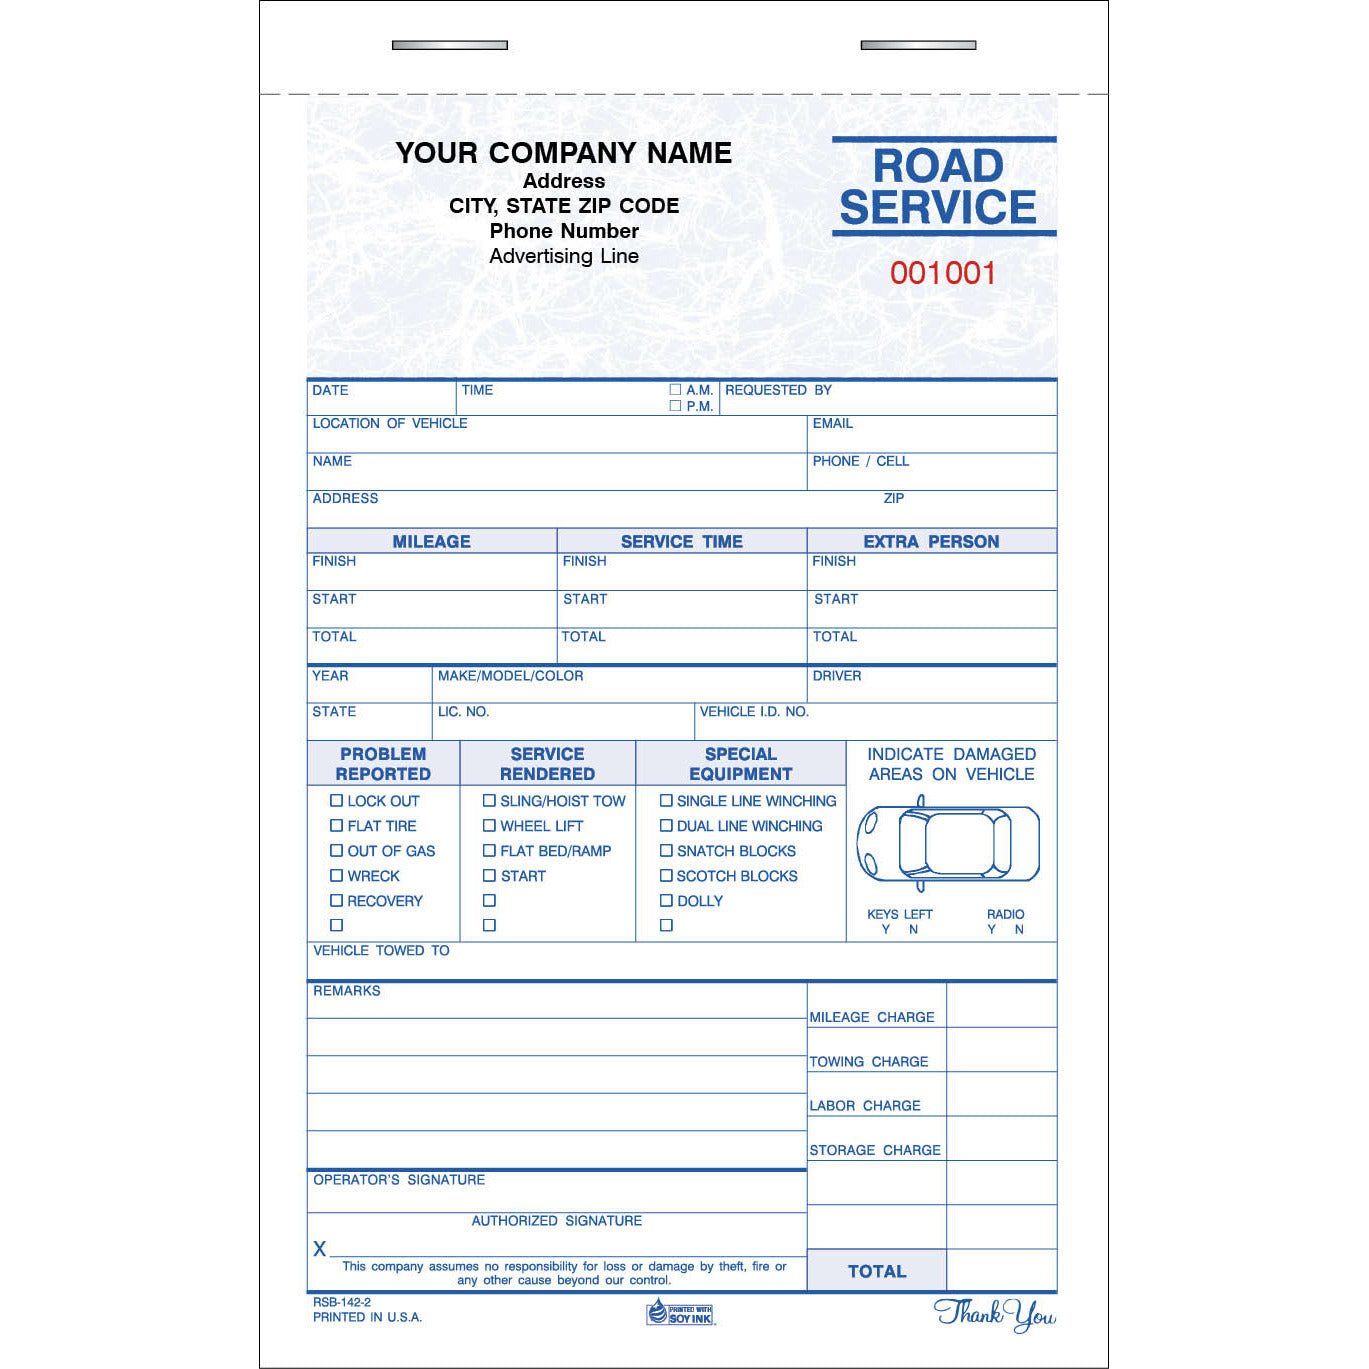 RSB-142-2 TOWING FORM 500 QTY